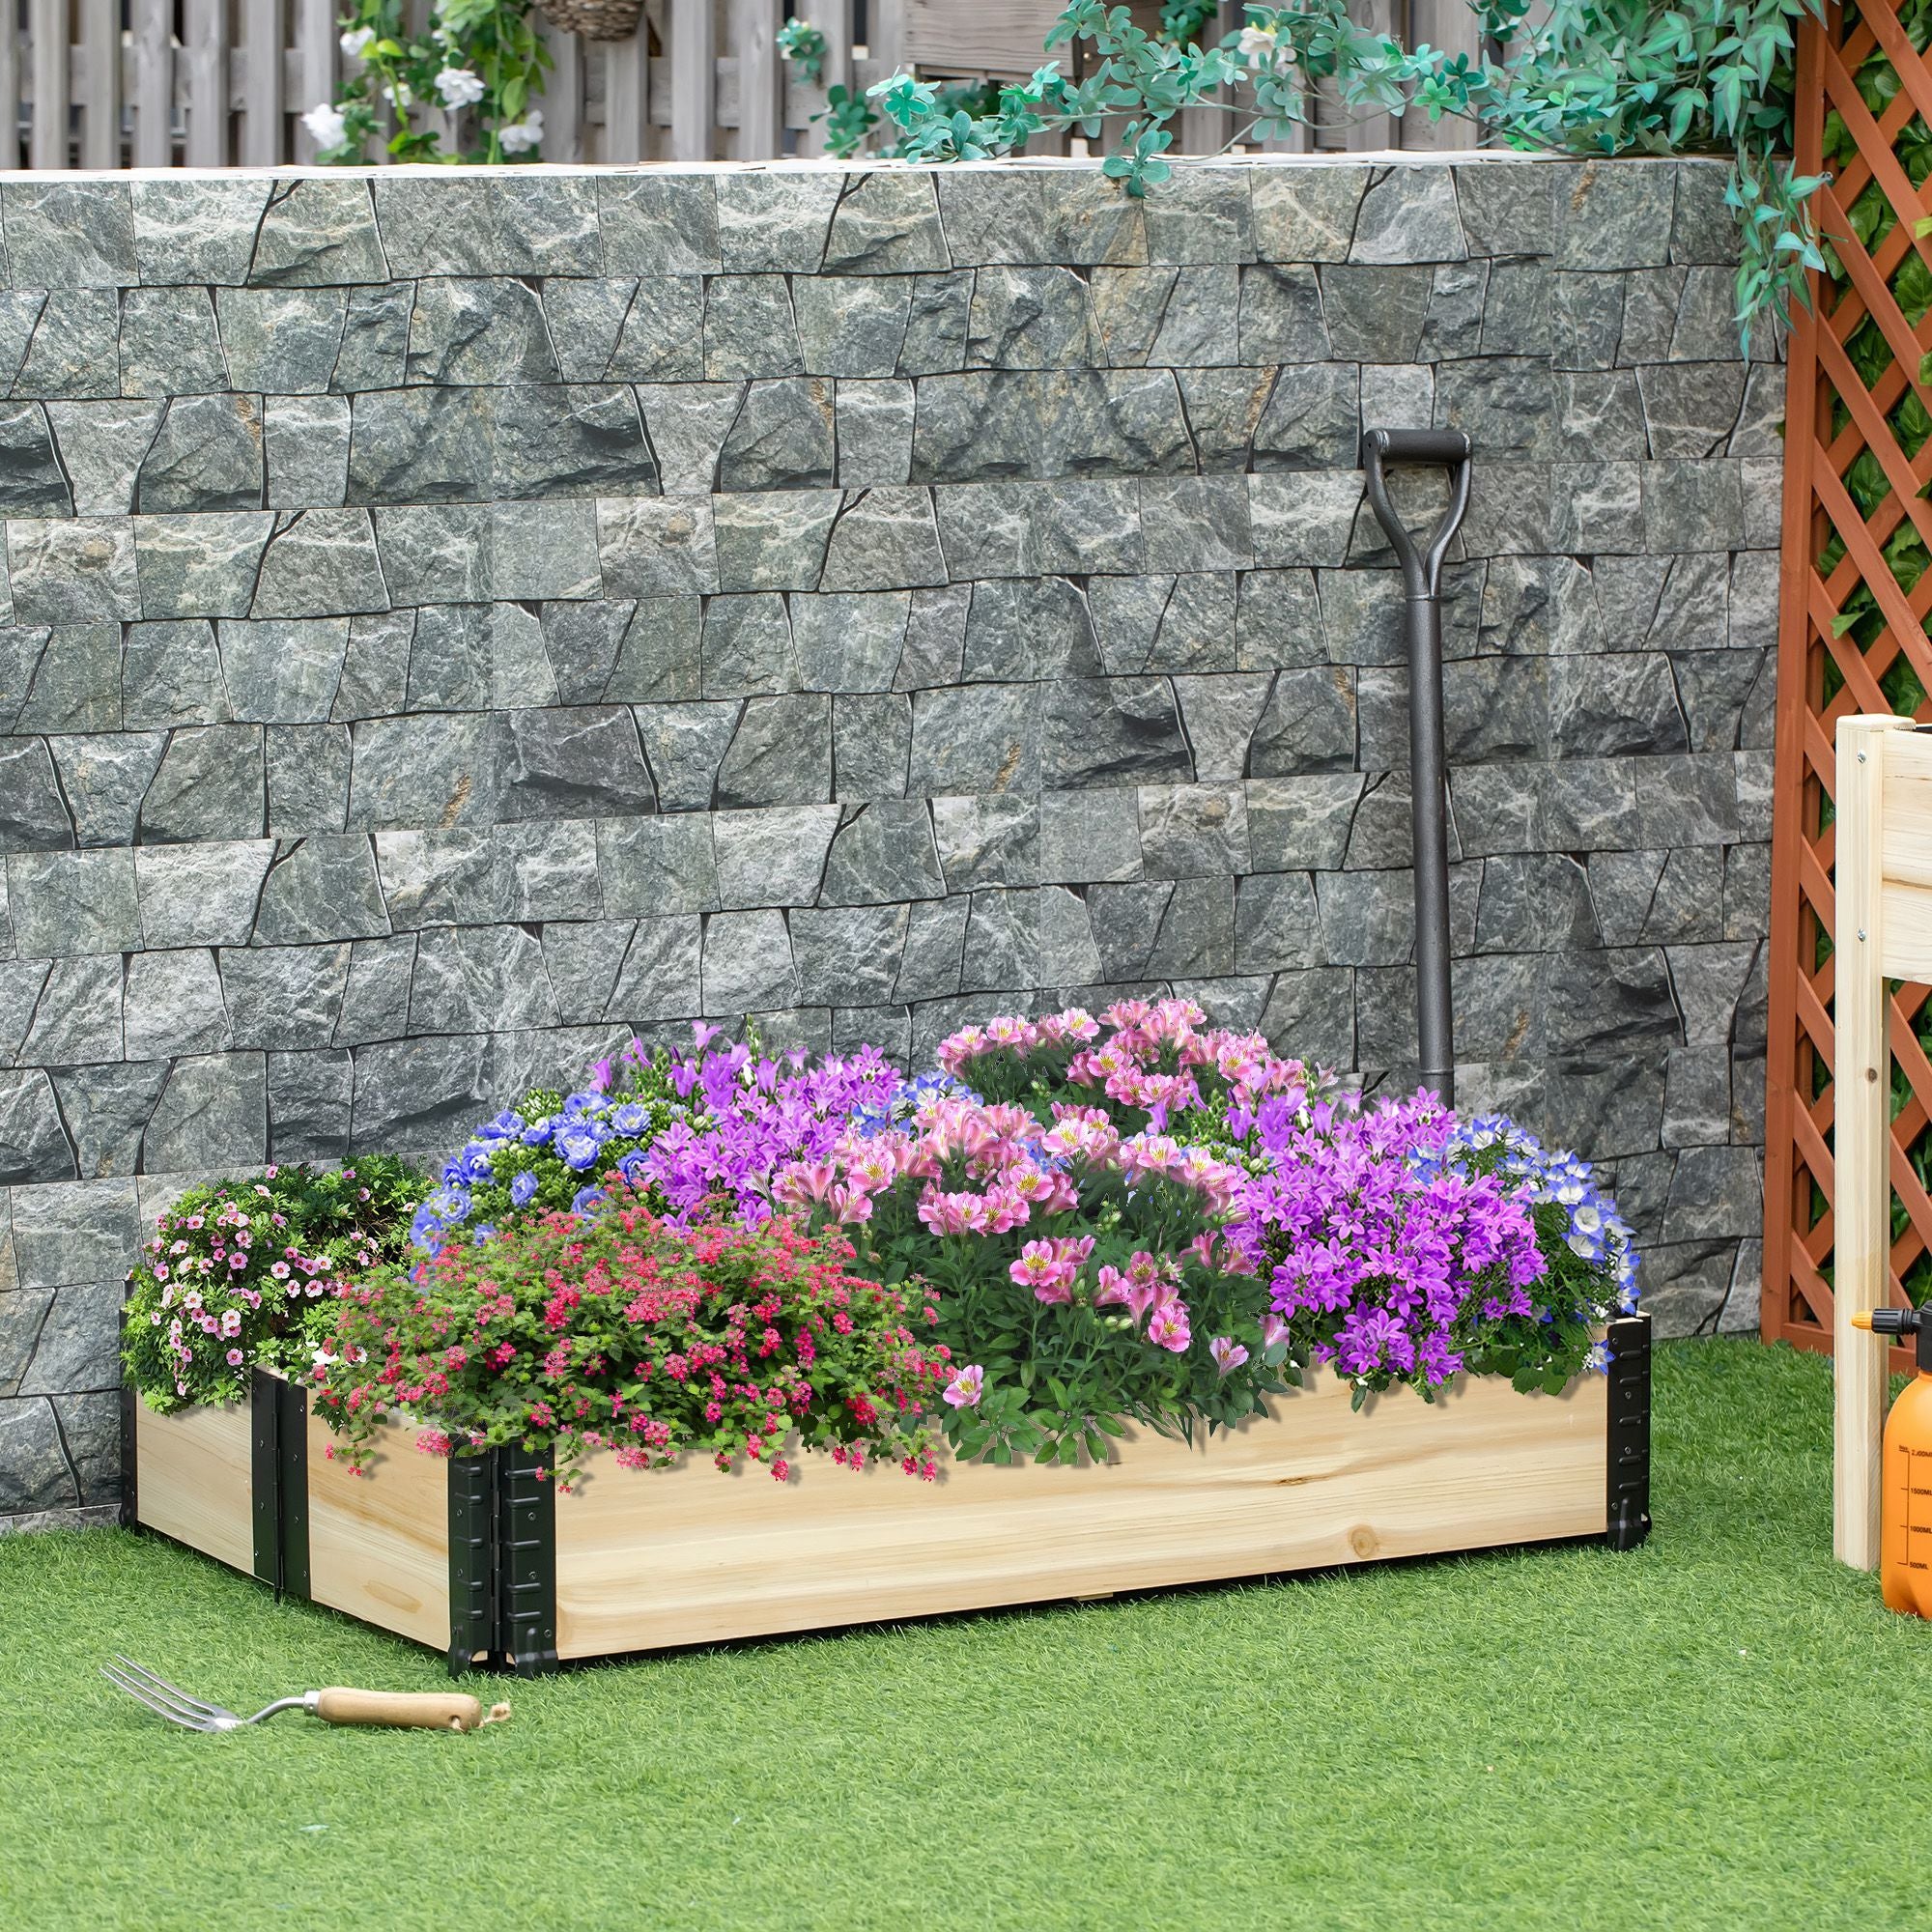 Outsunny Foldable Raised Garden Bed, Wooded